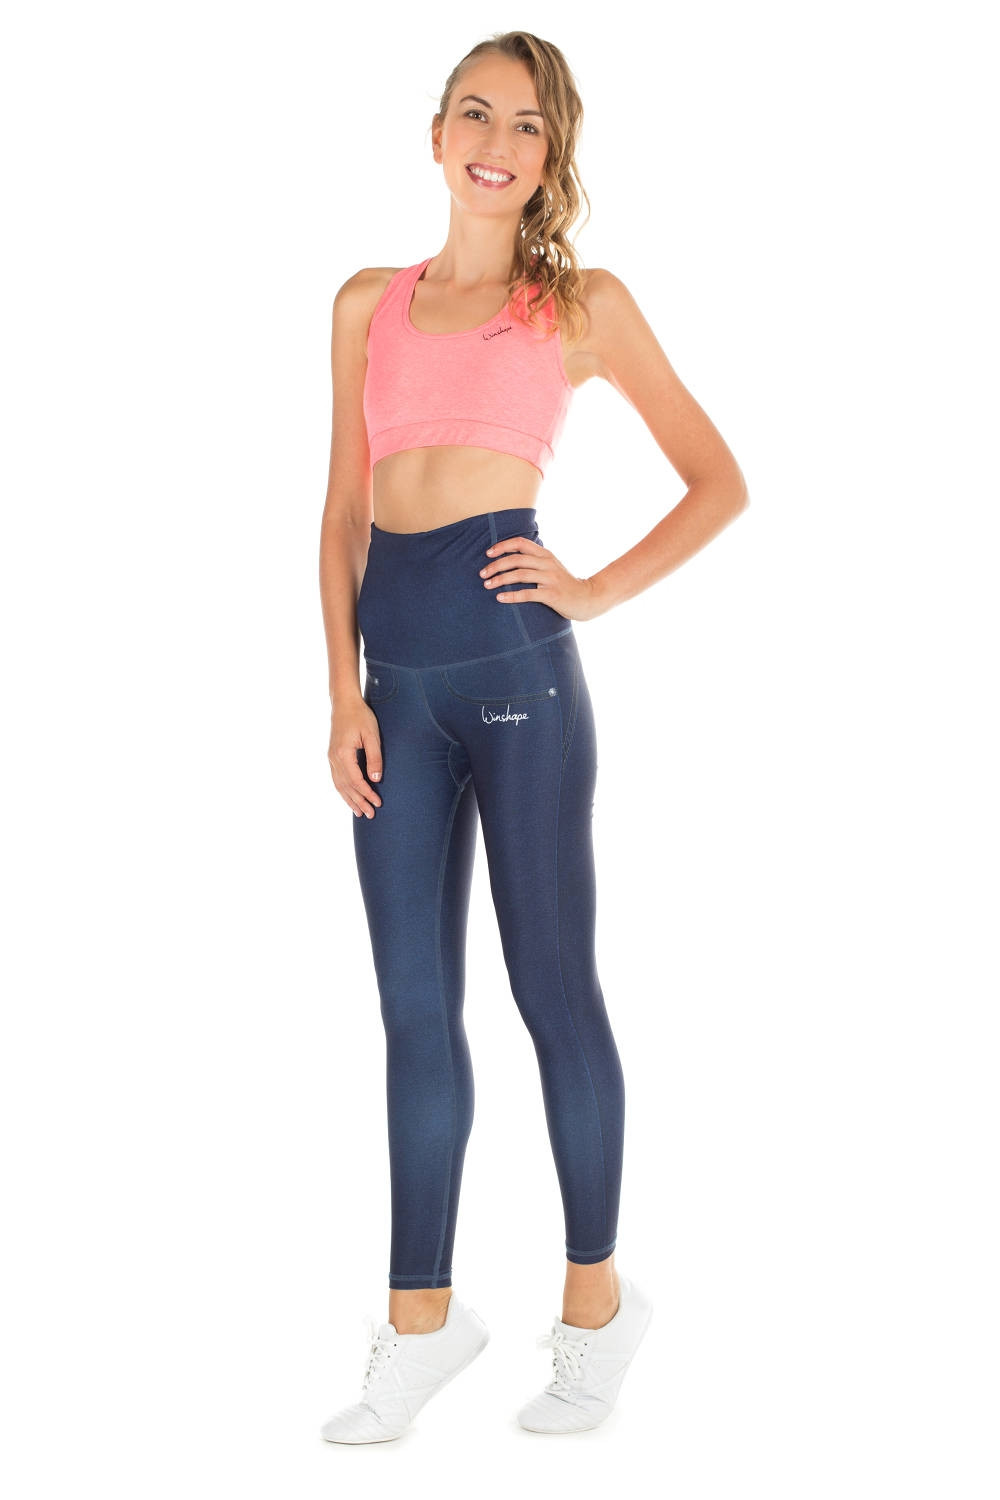 High Waist Jeans Power rich Slim Tights HWL102, “Bootylicious” blue, Functional Winshape Style Shape